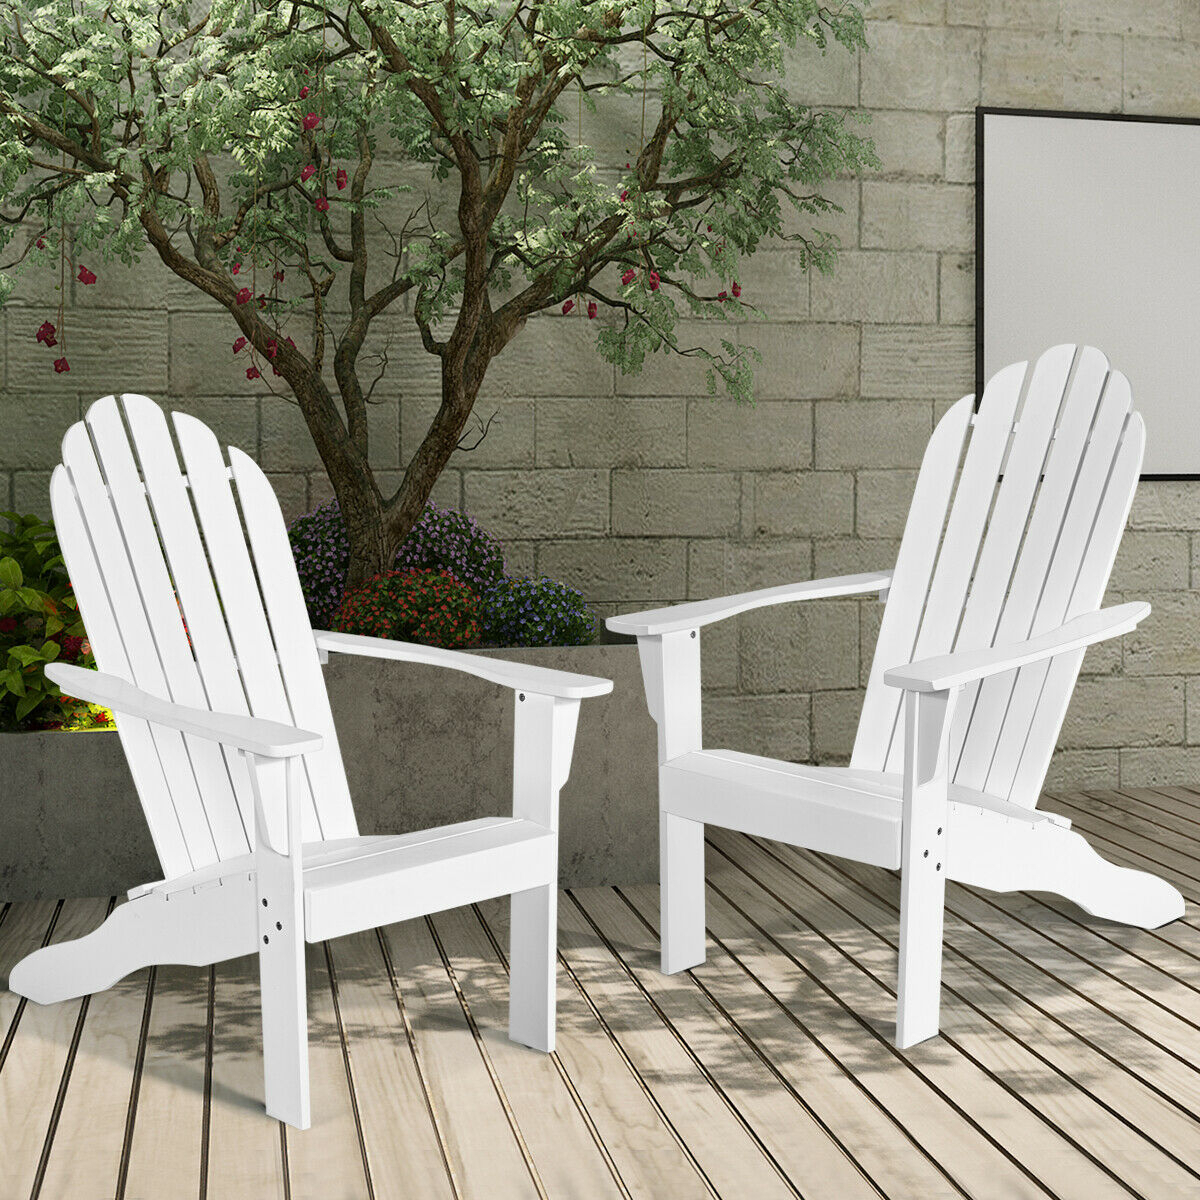 2PCS Wooden Classic Adirondack Chair Lounge Chair Outdoor Patio White